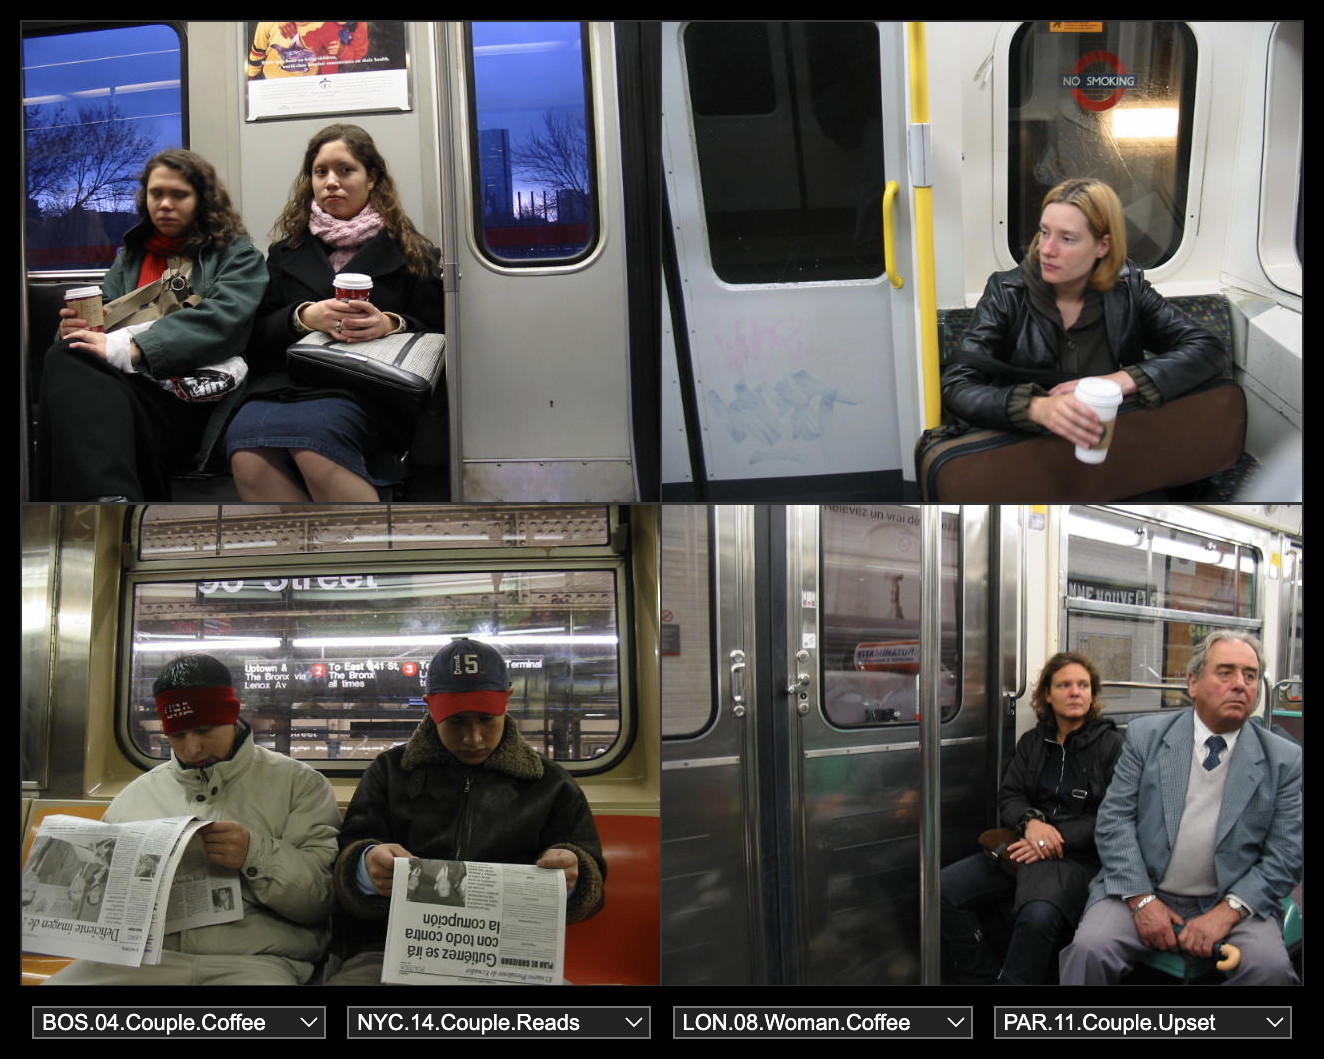 A grid of 4 photos of various people on the train in boston, new york, paris, and london.